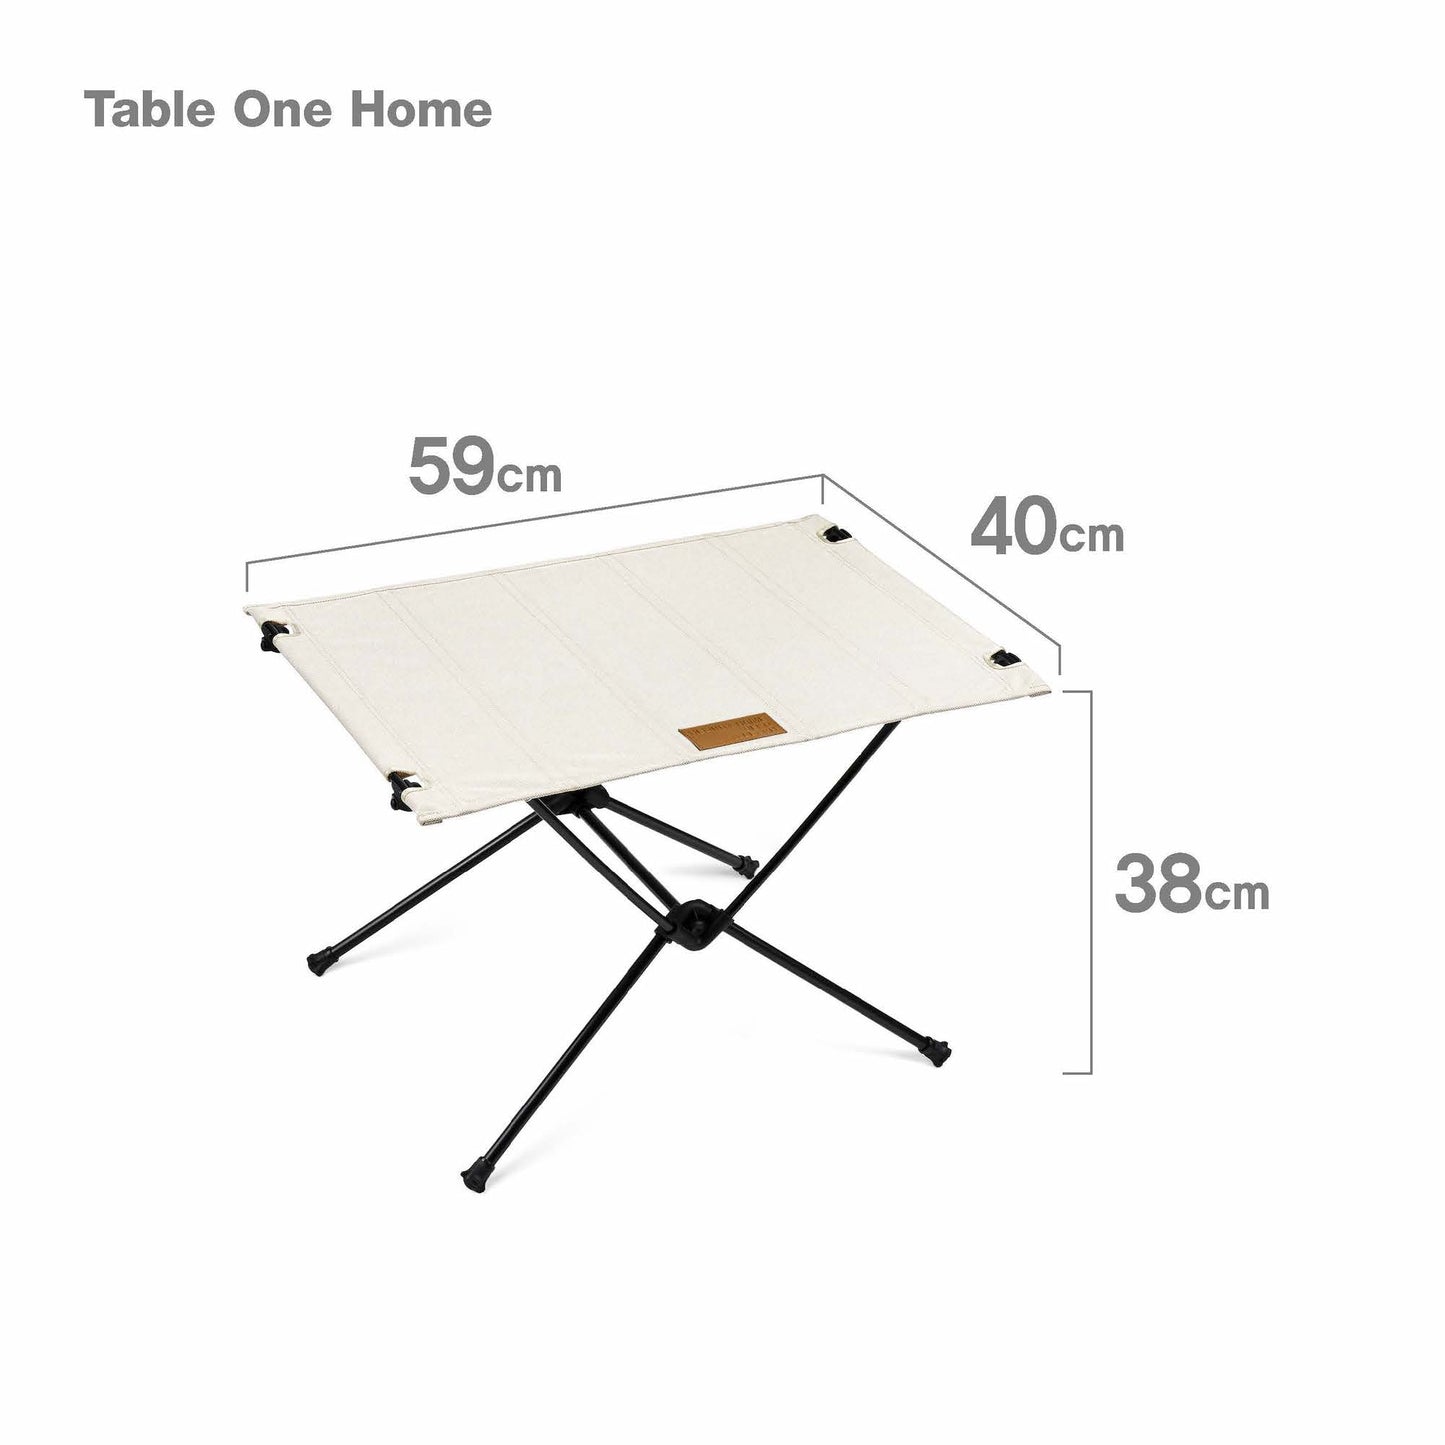 Table One Home - Pelican